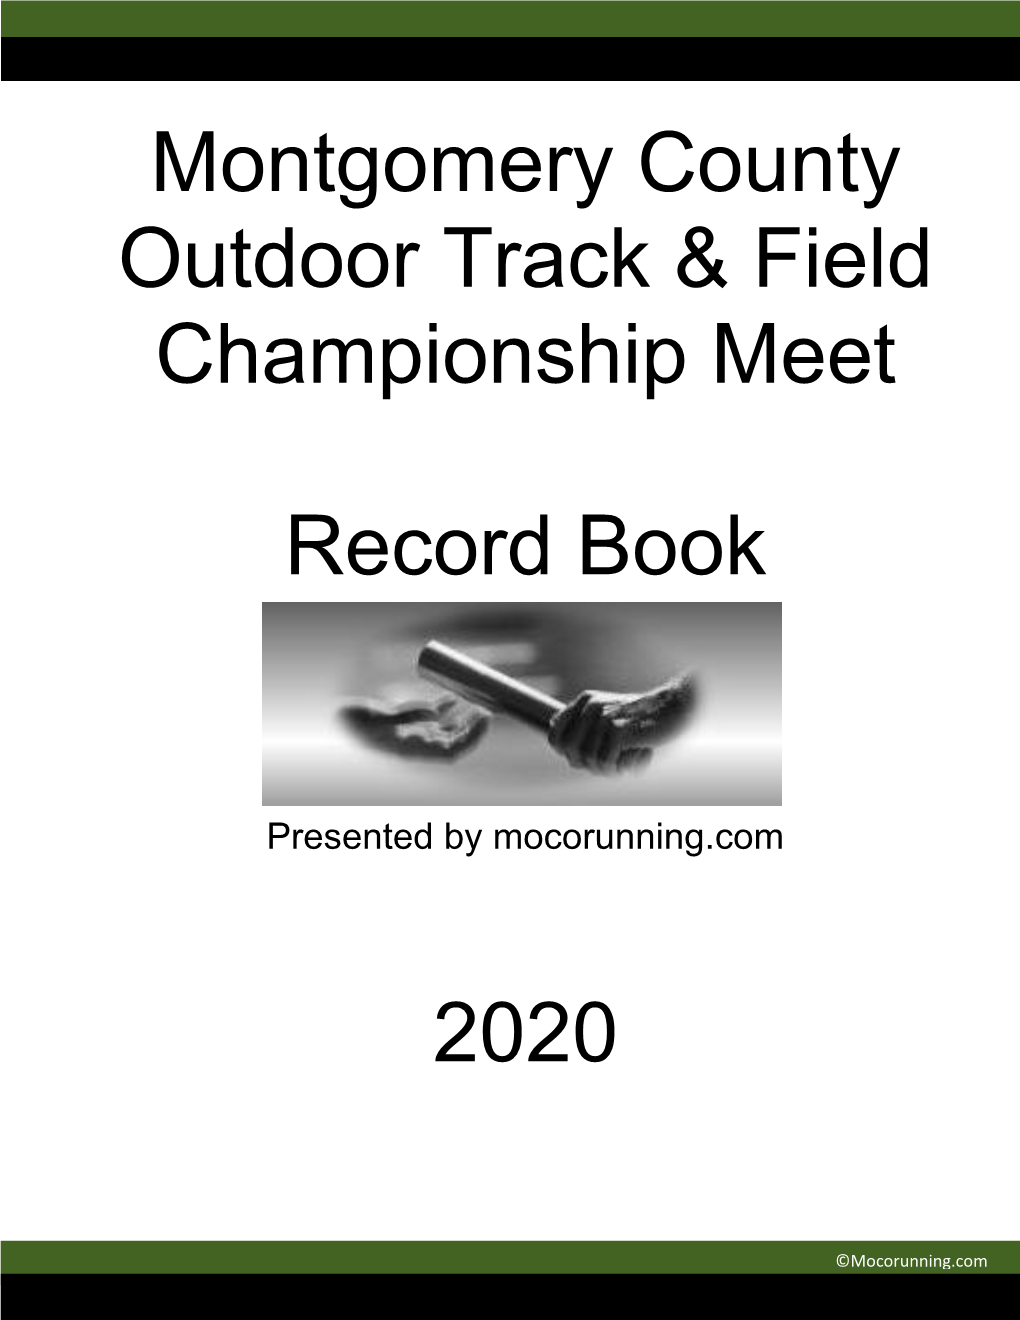 Montgomery County Outdoor Track & Field Championship Meet Record